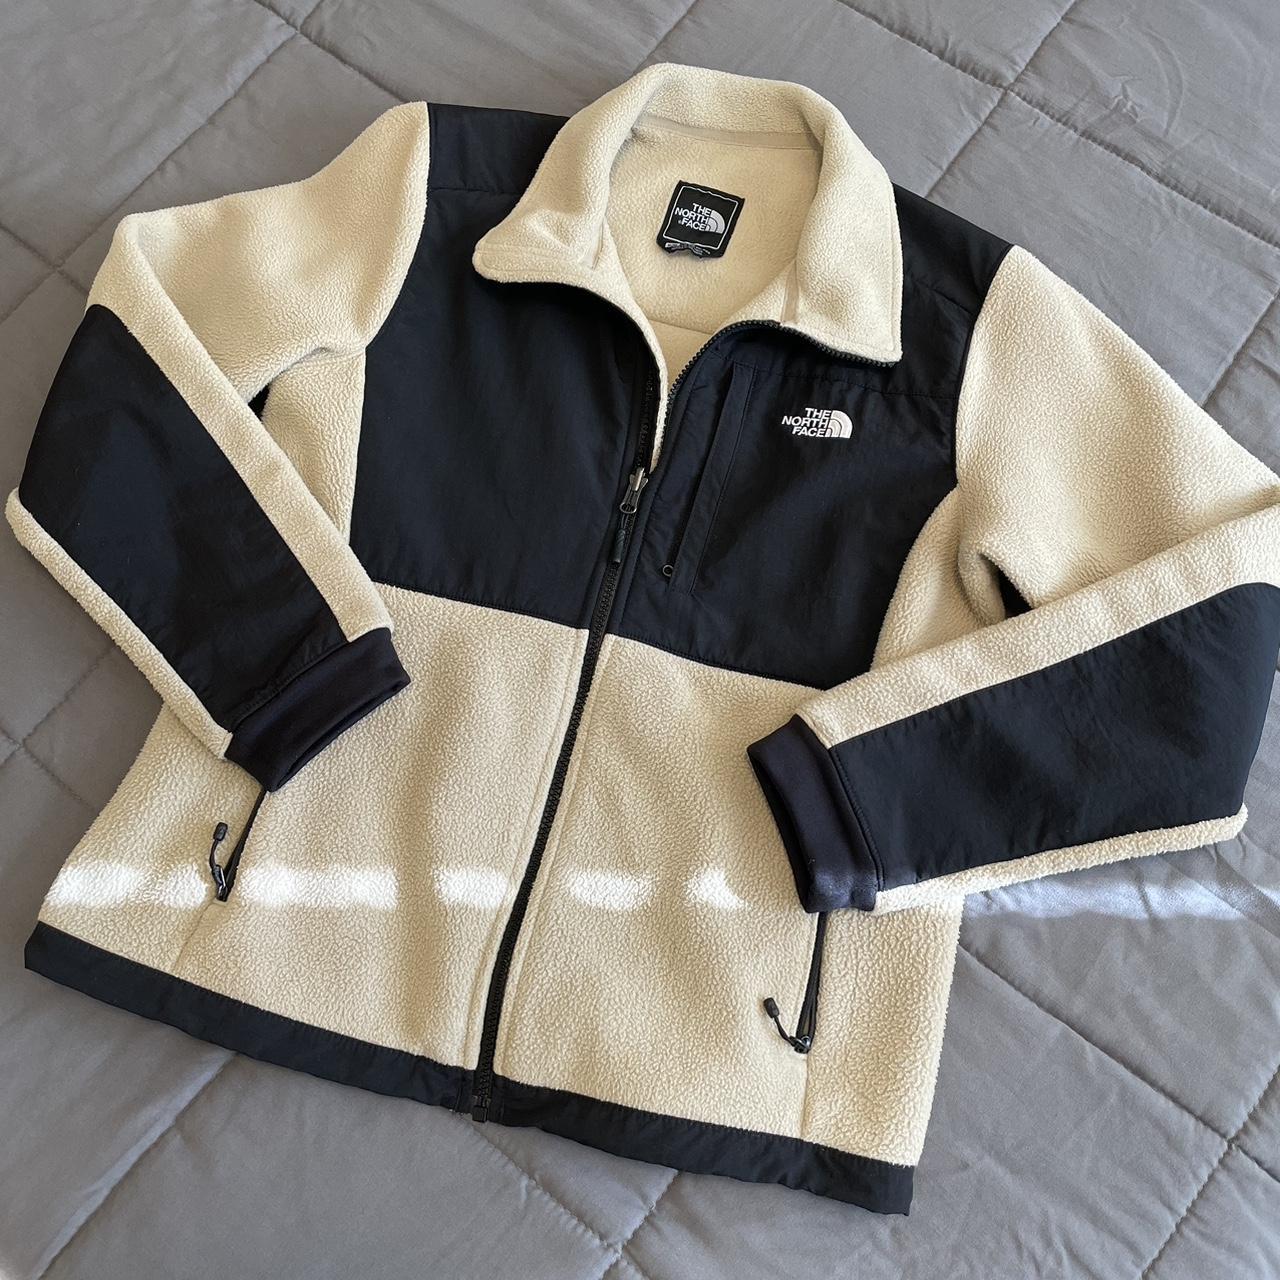 The North Face Women's Cream and Black Jacket